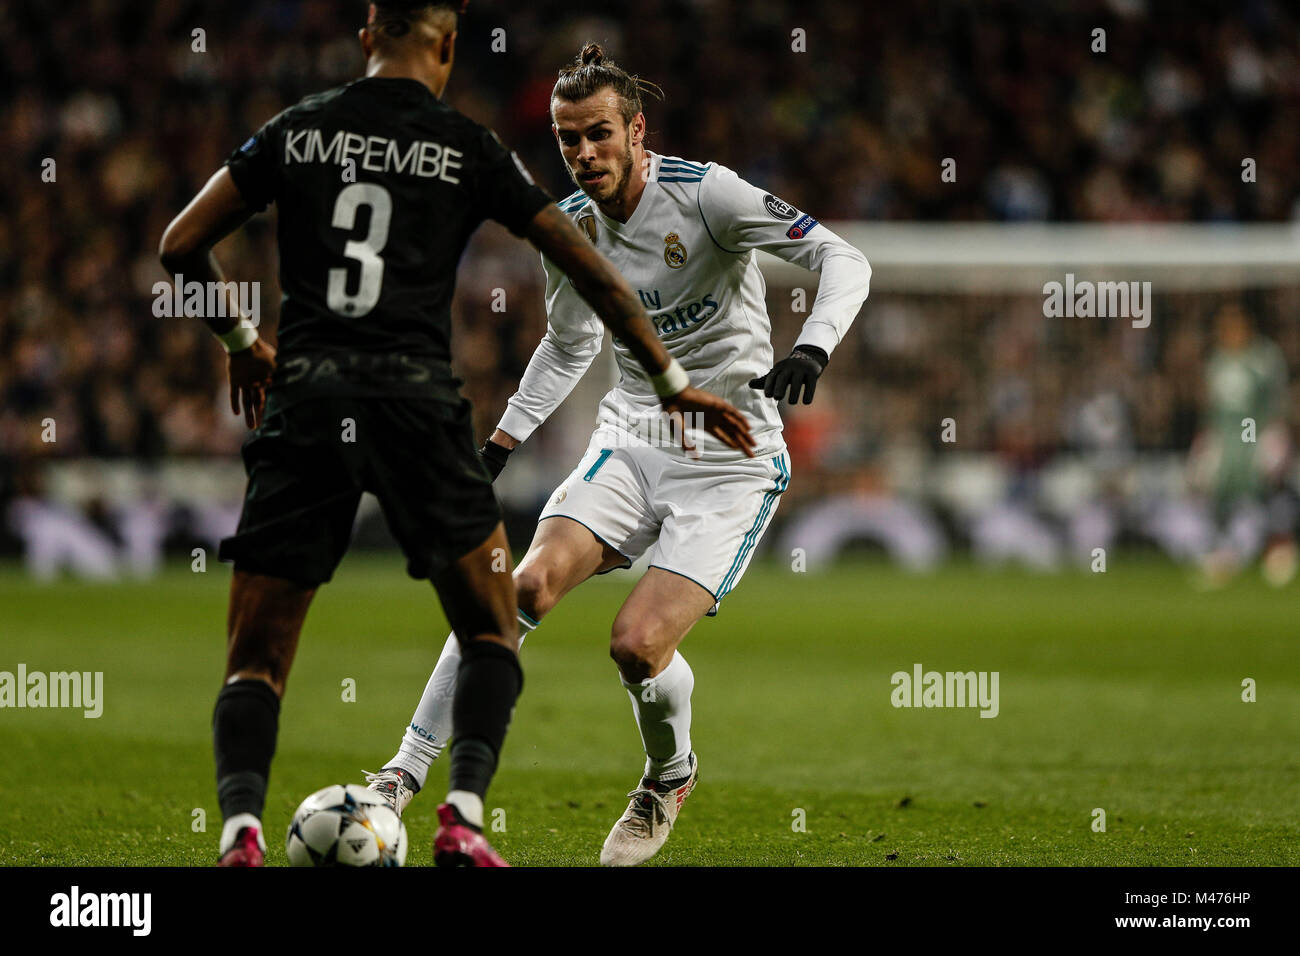 Gareth Bale (Real Madrid) drives forward on the ball Presnel Kimpembe (PSG),  UCL Champions League match between Real Madrid vs PSG at the Santiago  Bernabeu stadium in Madrid, Spain, February 14, 2018.